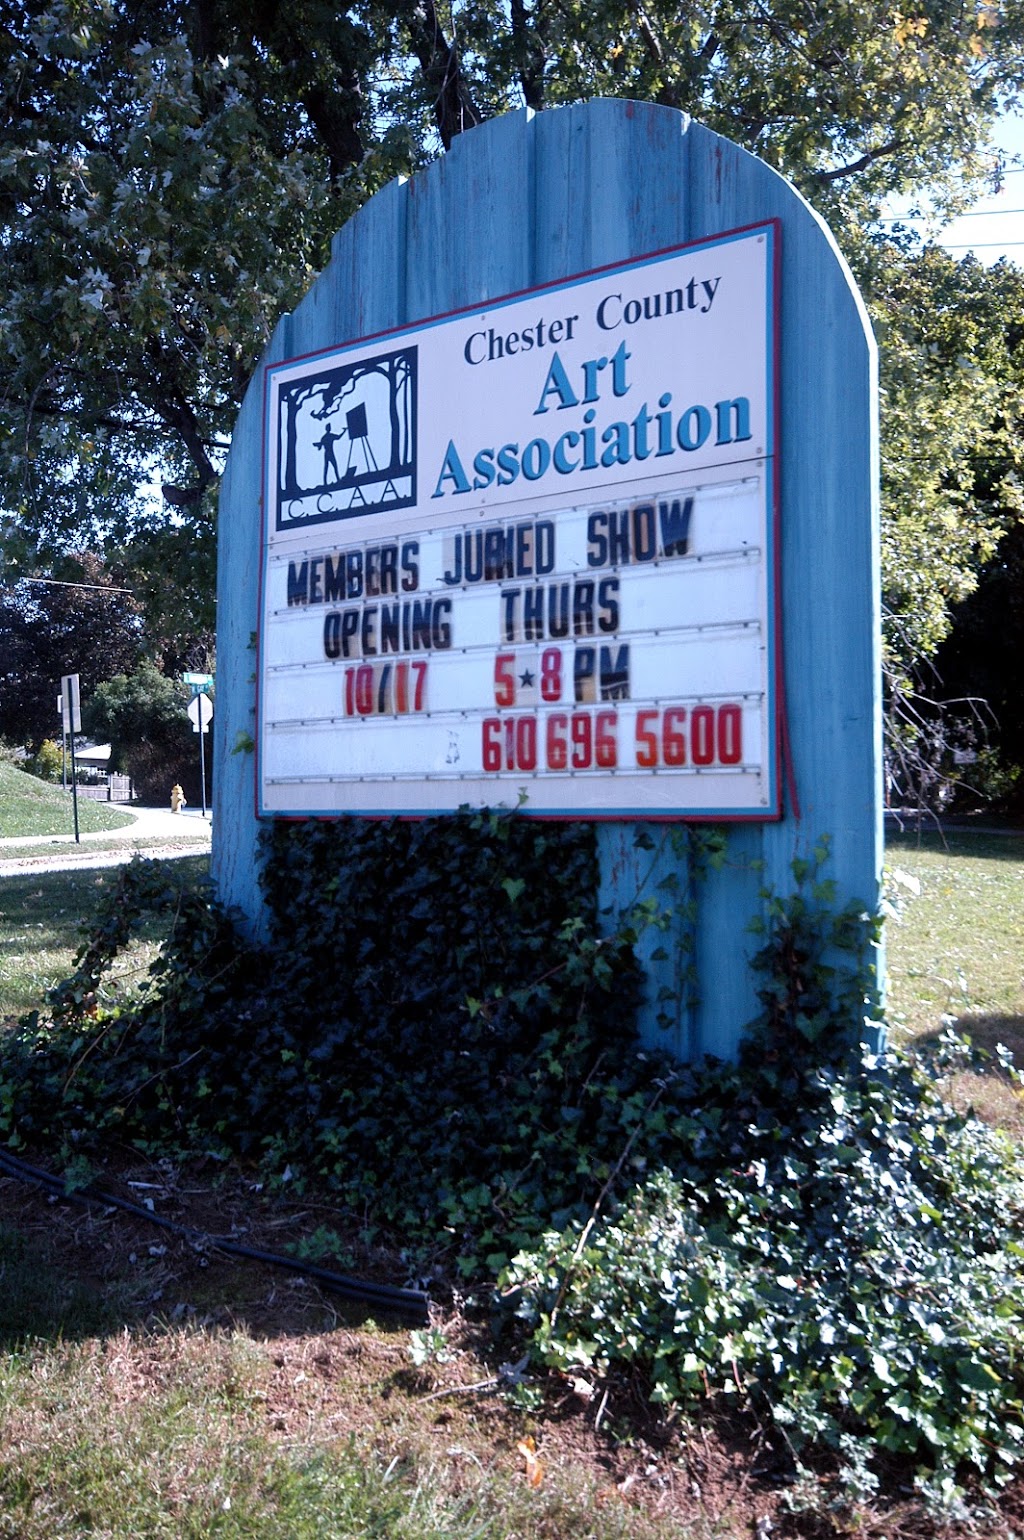 Chester County Art Association | 100 N Bradford Ave, West Chester, PA 19382 | Phone: (610) 696-5600